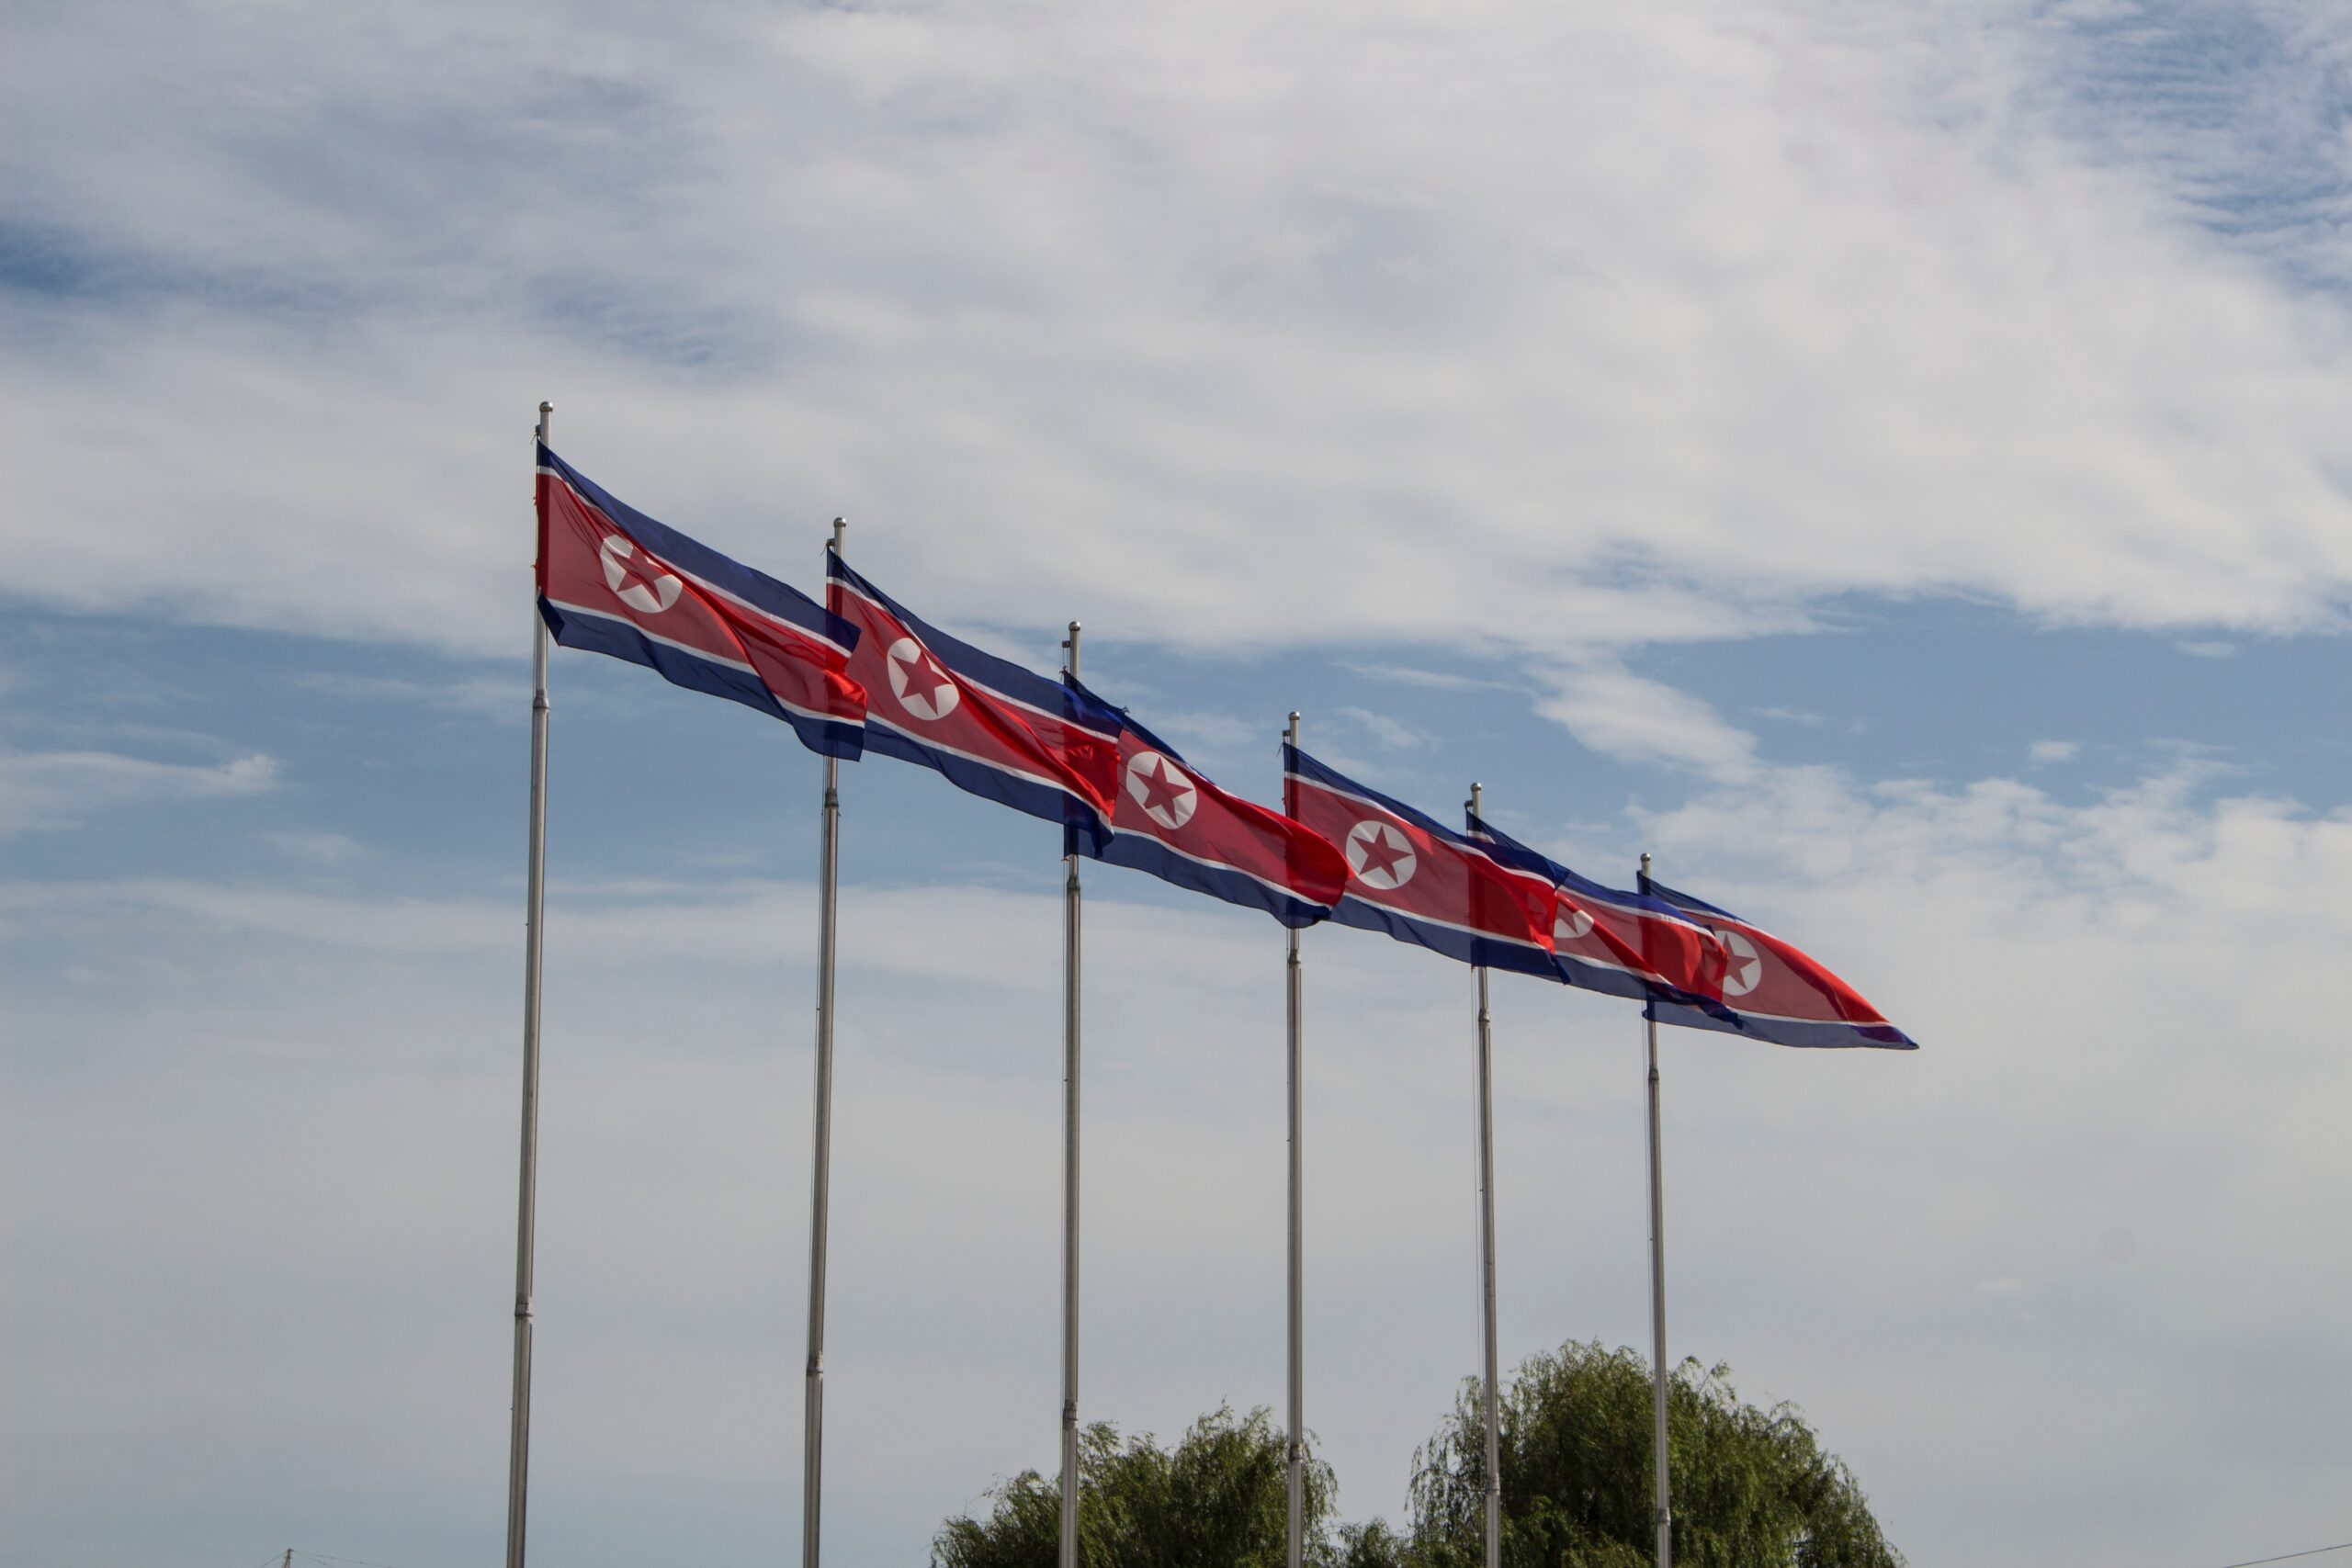 A photograph of a row of flagpoles with the flag of the Democratic People's Republic of Korea against a blue sky with clouds.